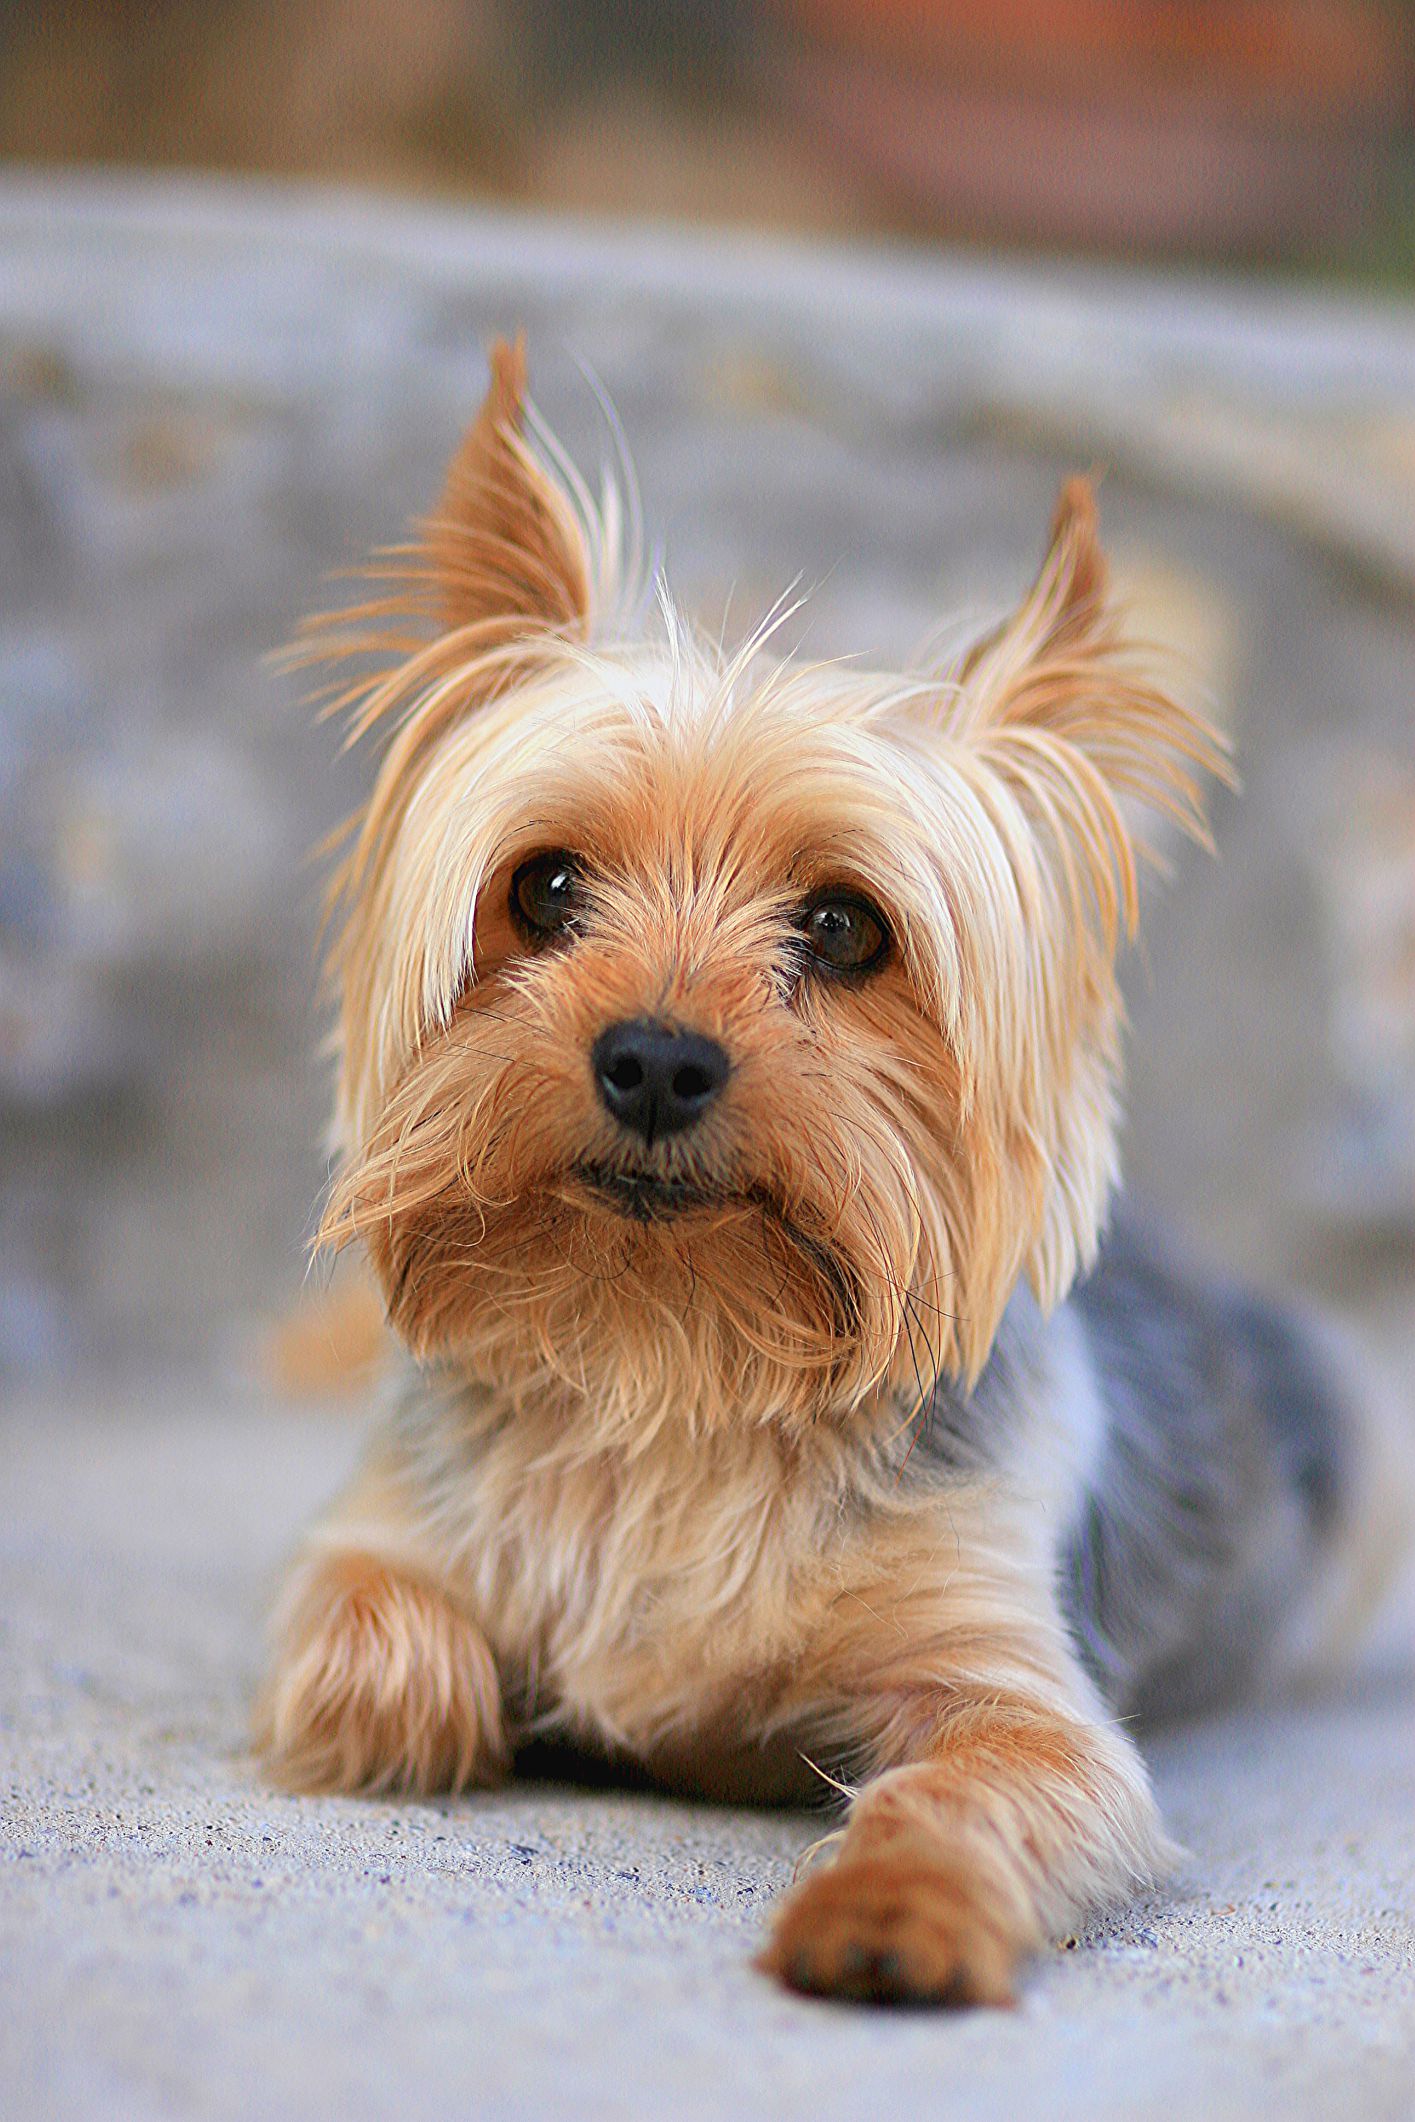 35 Best Small Dog Breeds - List of Top Small Dogs with Pictures